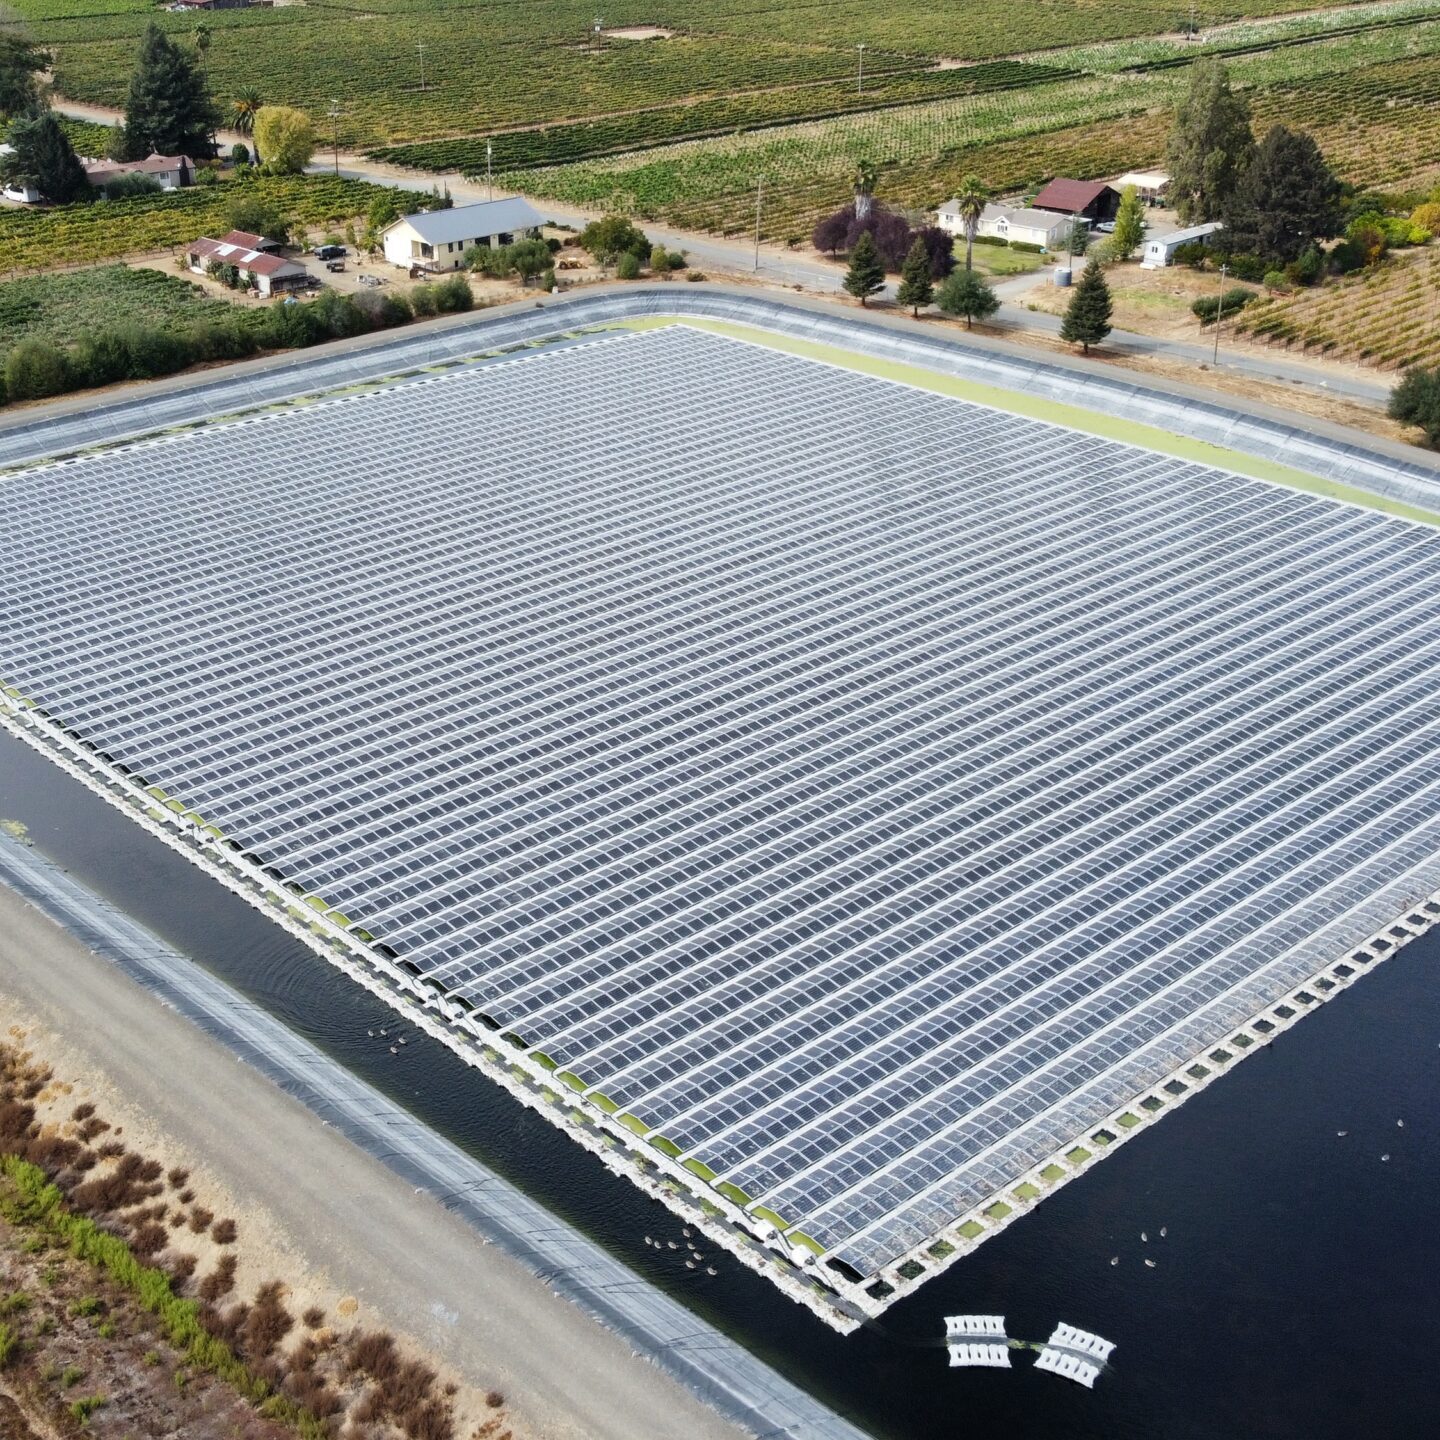 The country’s largest floating solar array (4.8 MW) in Healdsburg, CA, designed, engineered, and co-developed by Noria Energy.